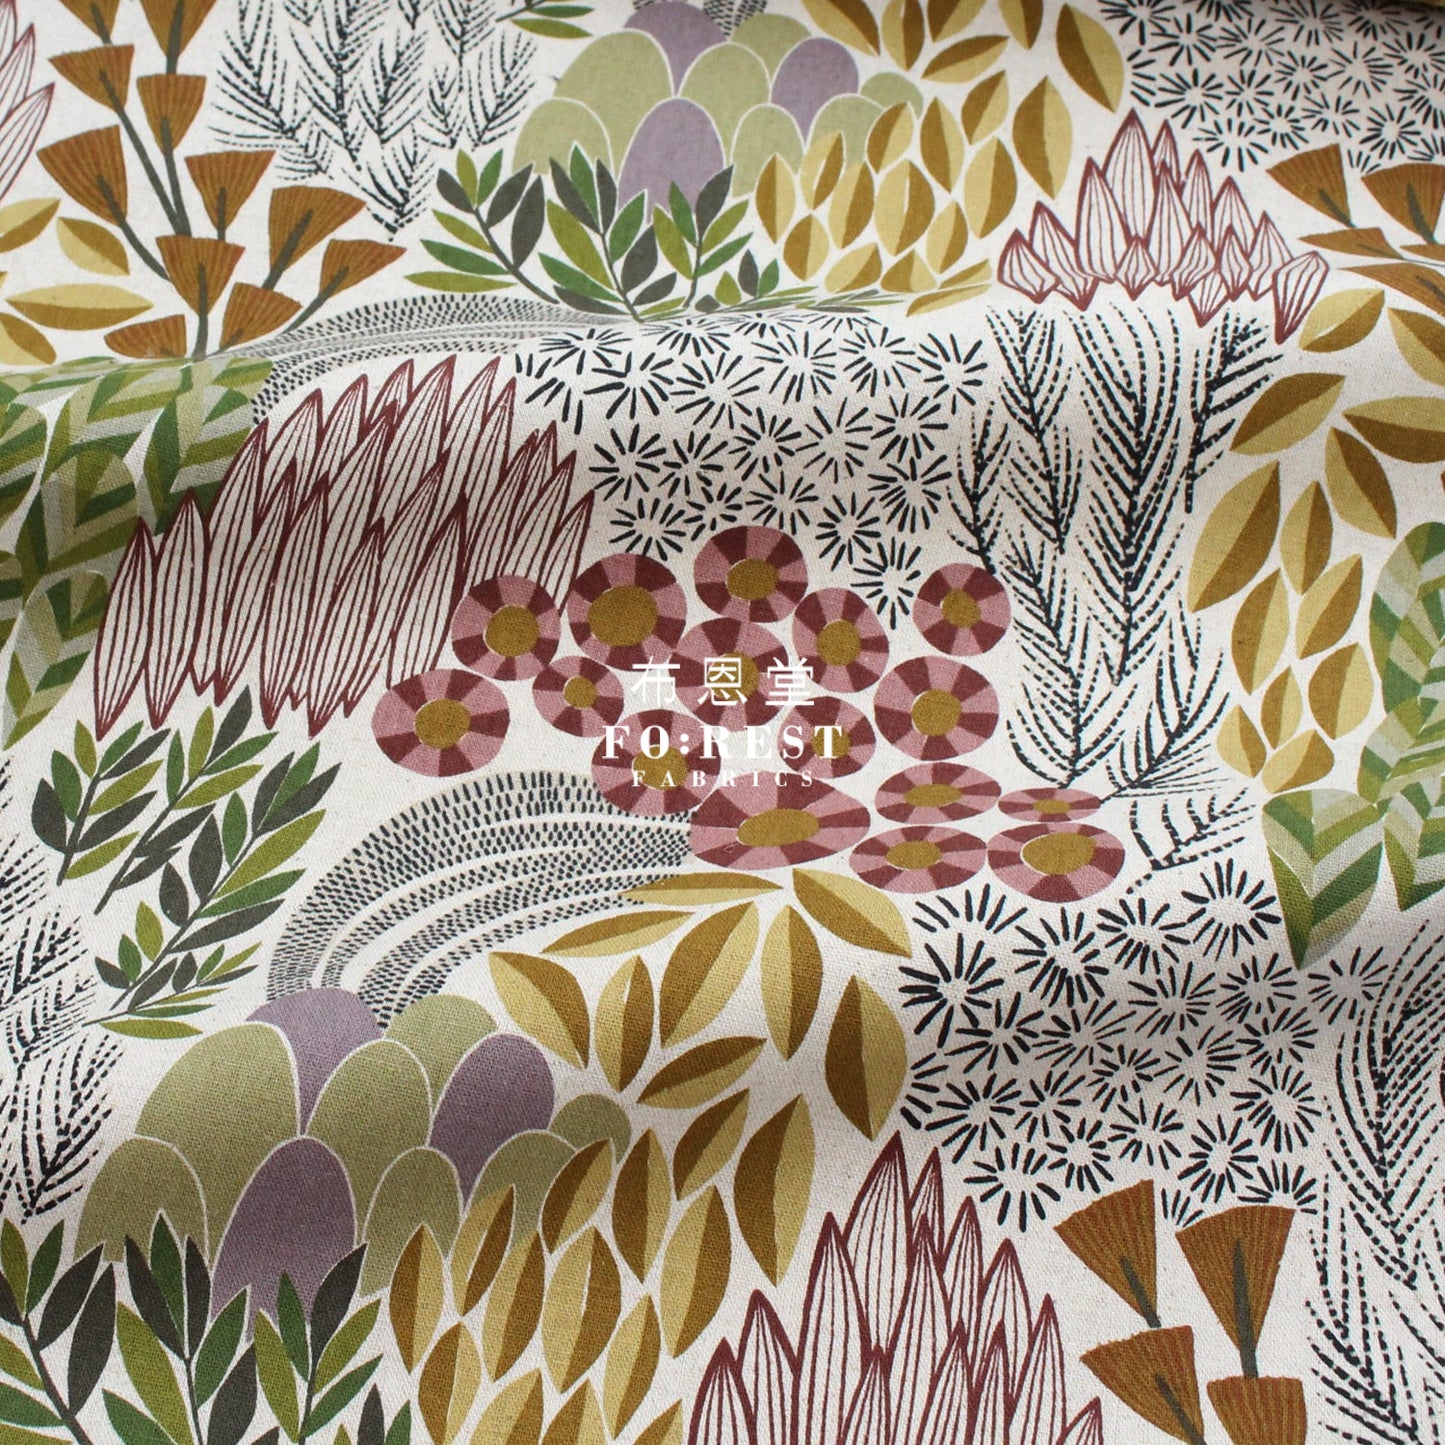 Cotton Linen - Bloom By Bookhou Garden Fabric A Fabric